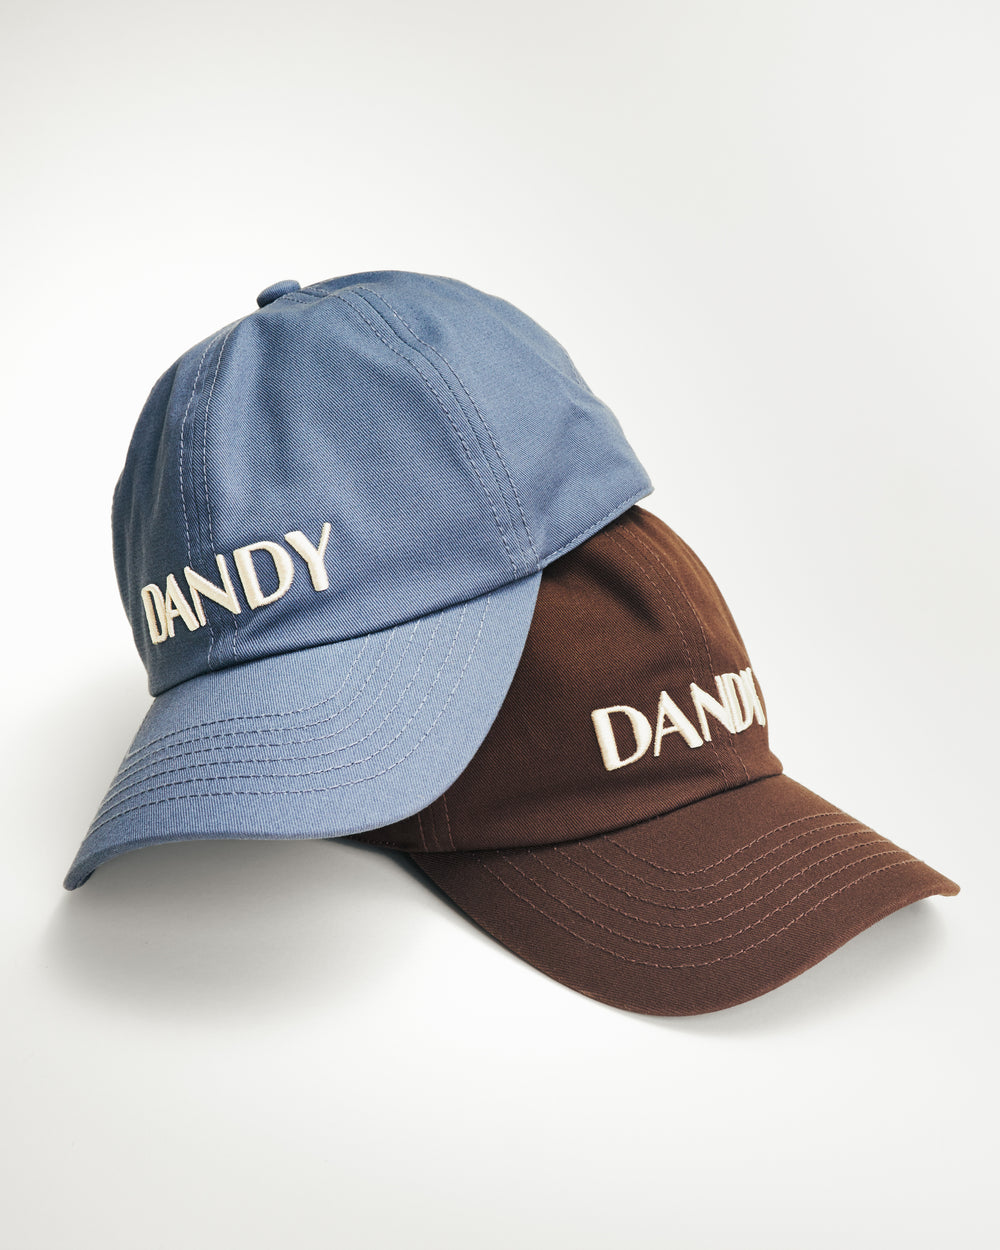 Two Dandy Del Mar Hats, each with a 100% cotton shell.